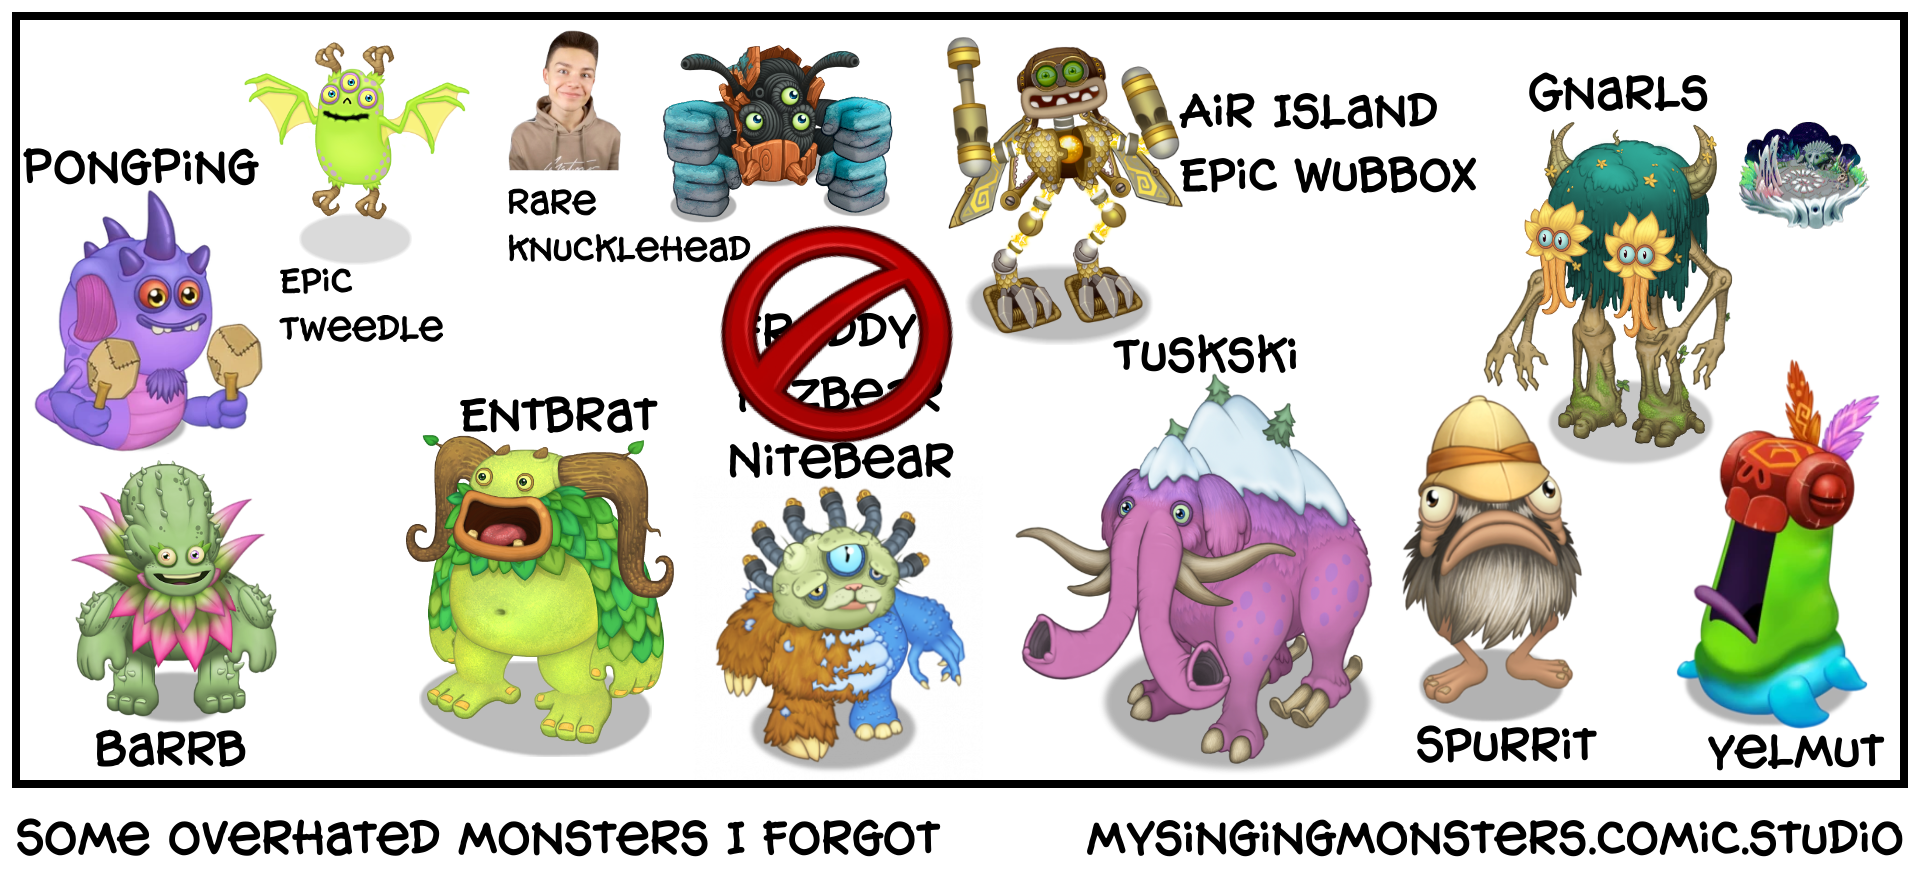 Some overhated monsters I forgot